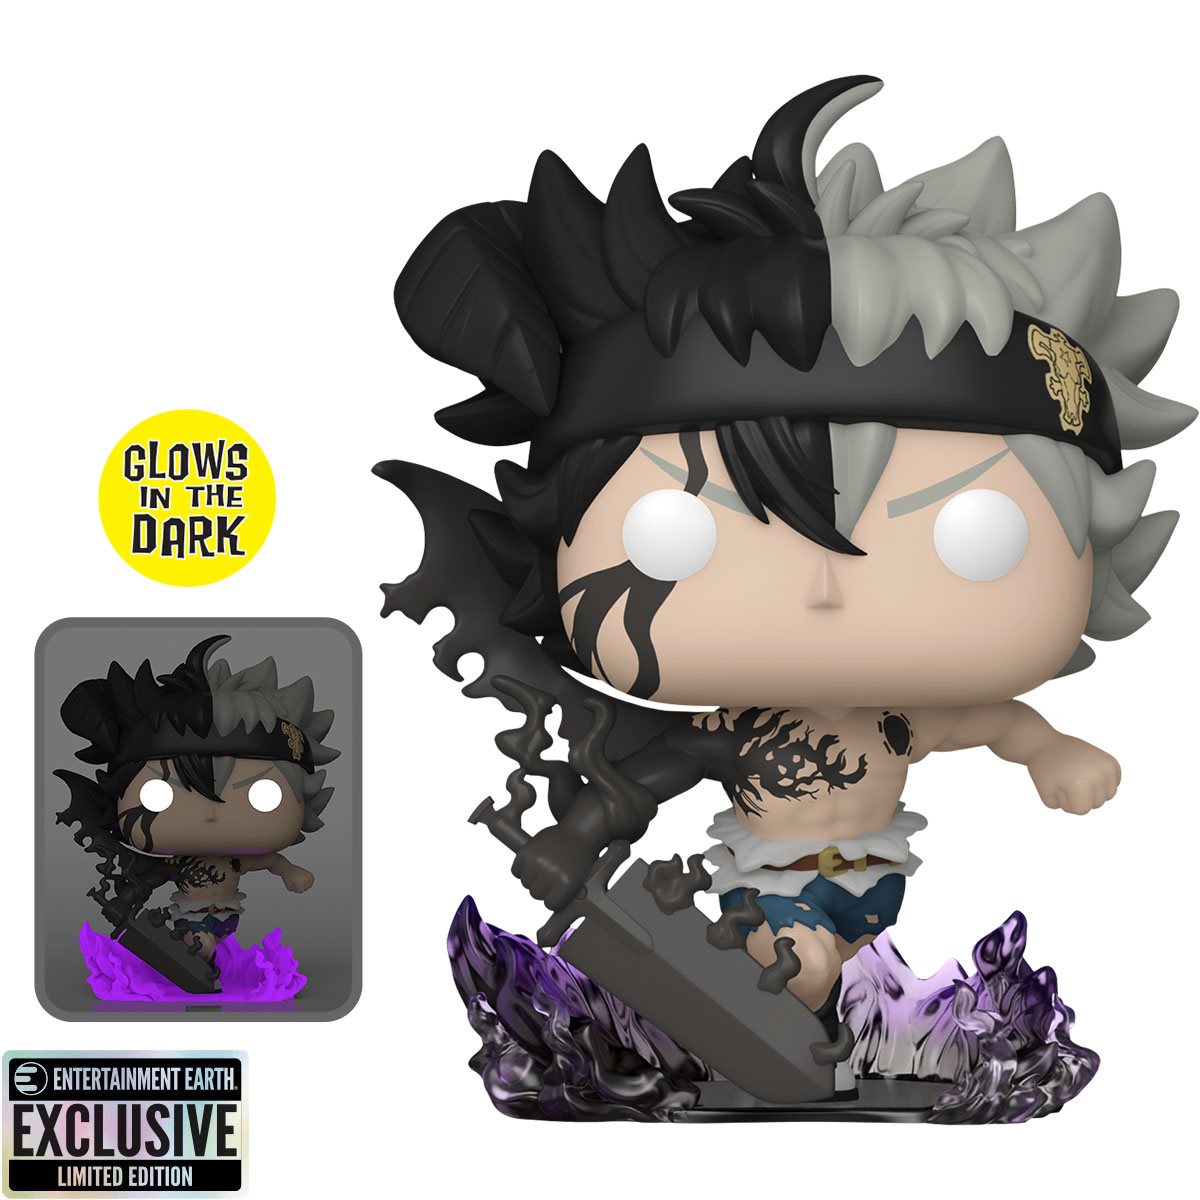 The Black Clover Funko Pop set is complete! At least until more get  announced : r/BlackClover